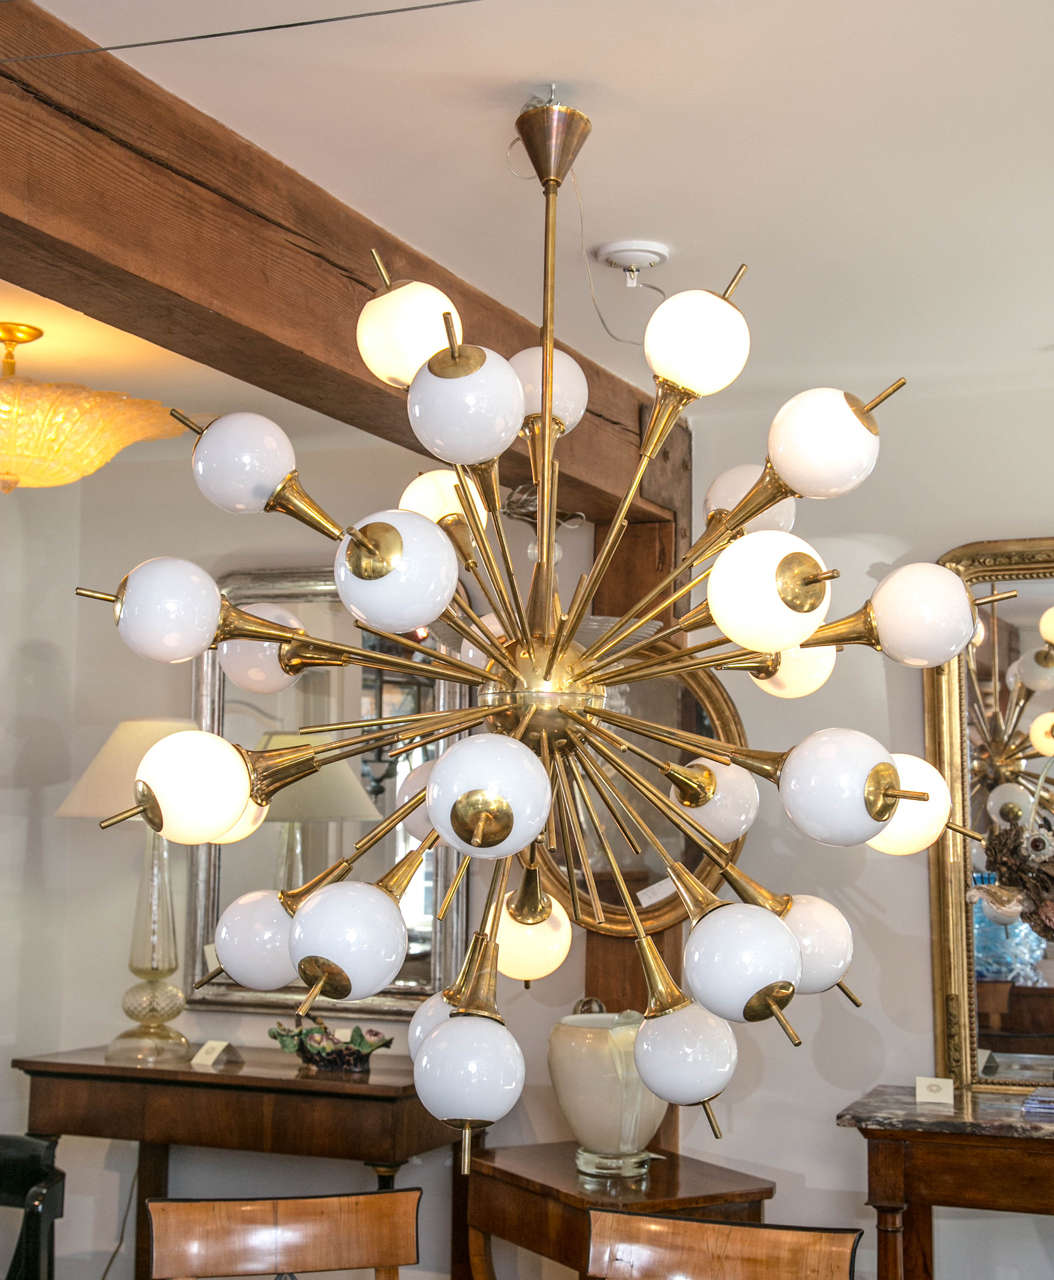 Fabulous Italian design; Stilnovo 1960s style round fixture with a brass center and 32 shooting arms with blown Murano balls that are all illuminated ready!
Very playful and fun to select which to illuminate or can have them all illuminated.
Each